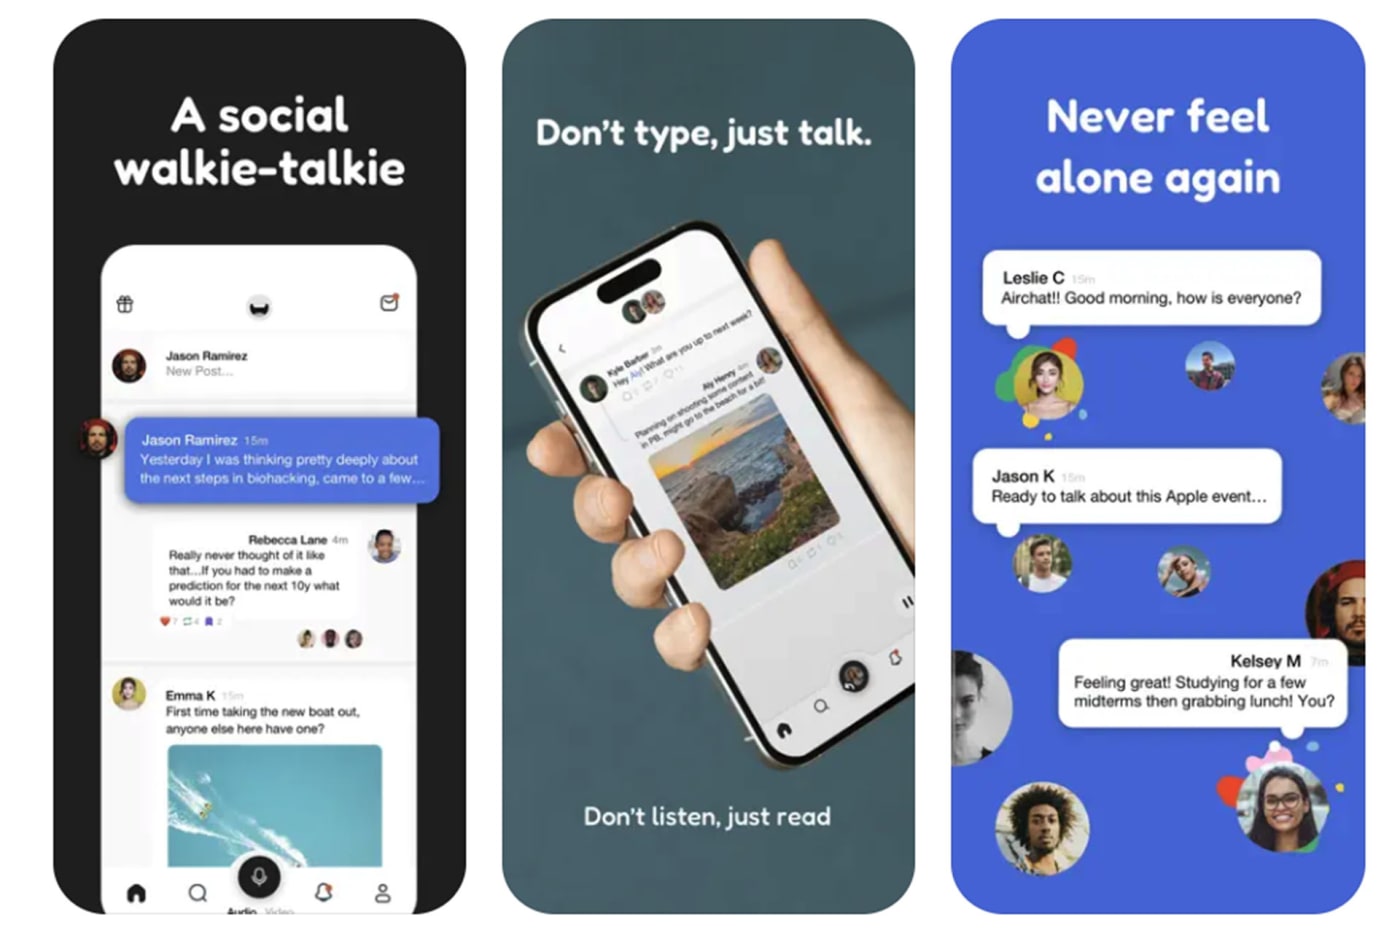 Airchat is the latest app trying to make 'social audio' cool again